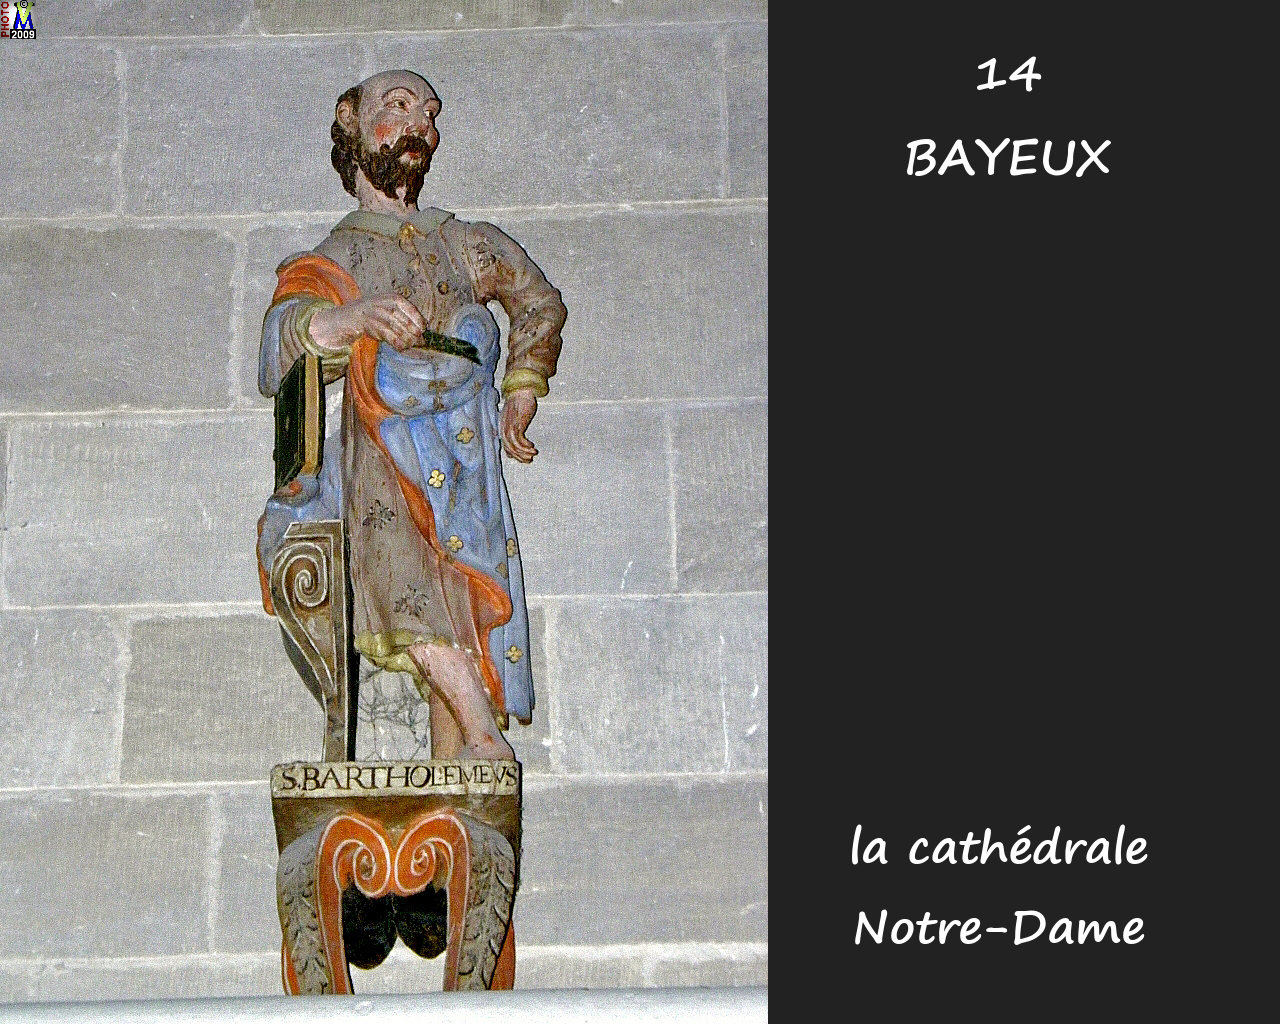 14BAYEUX_cathedrale_254.jpg